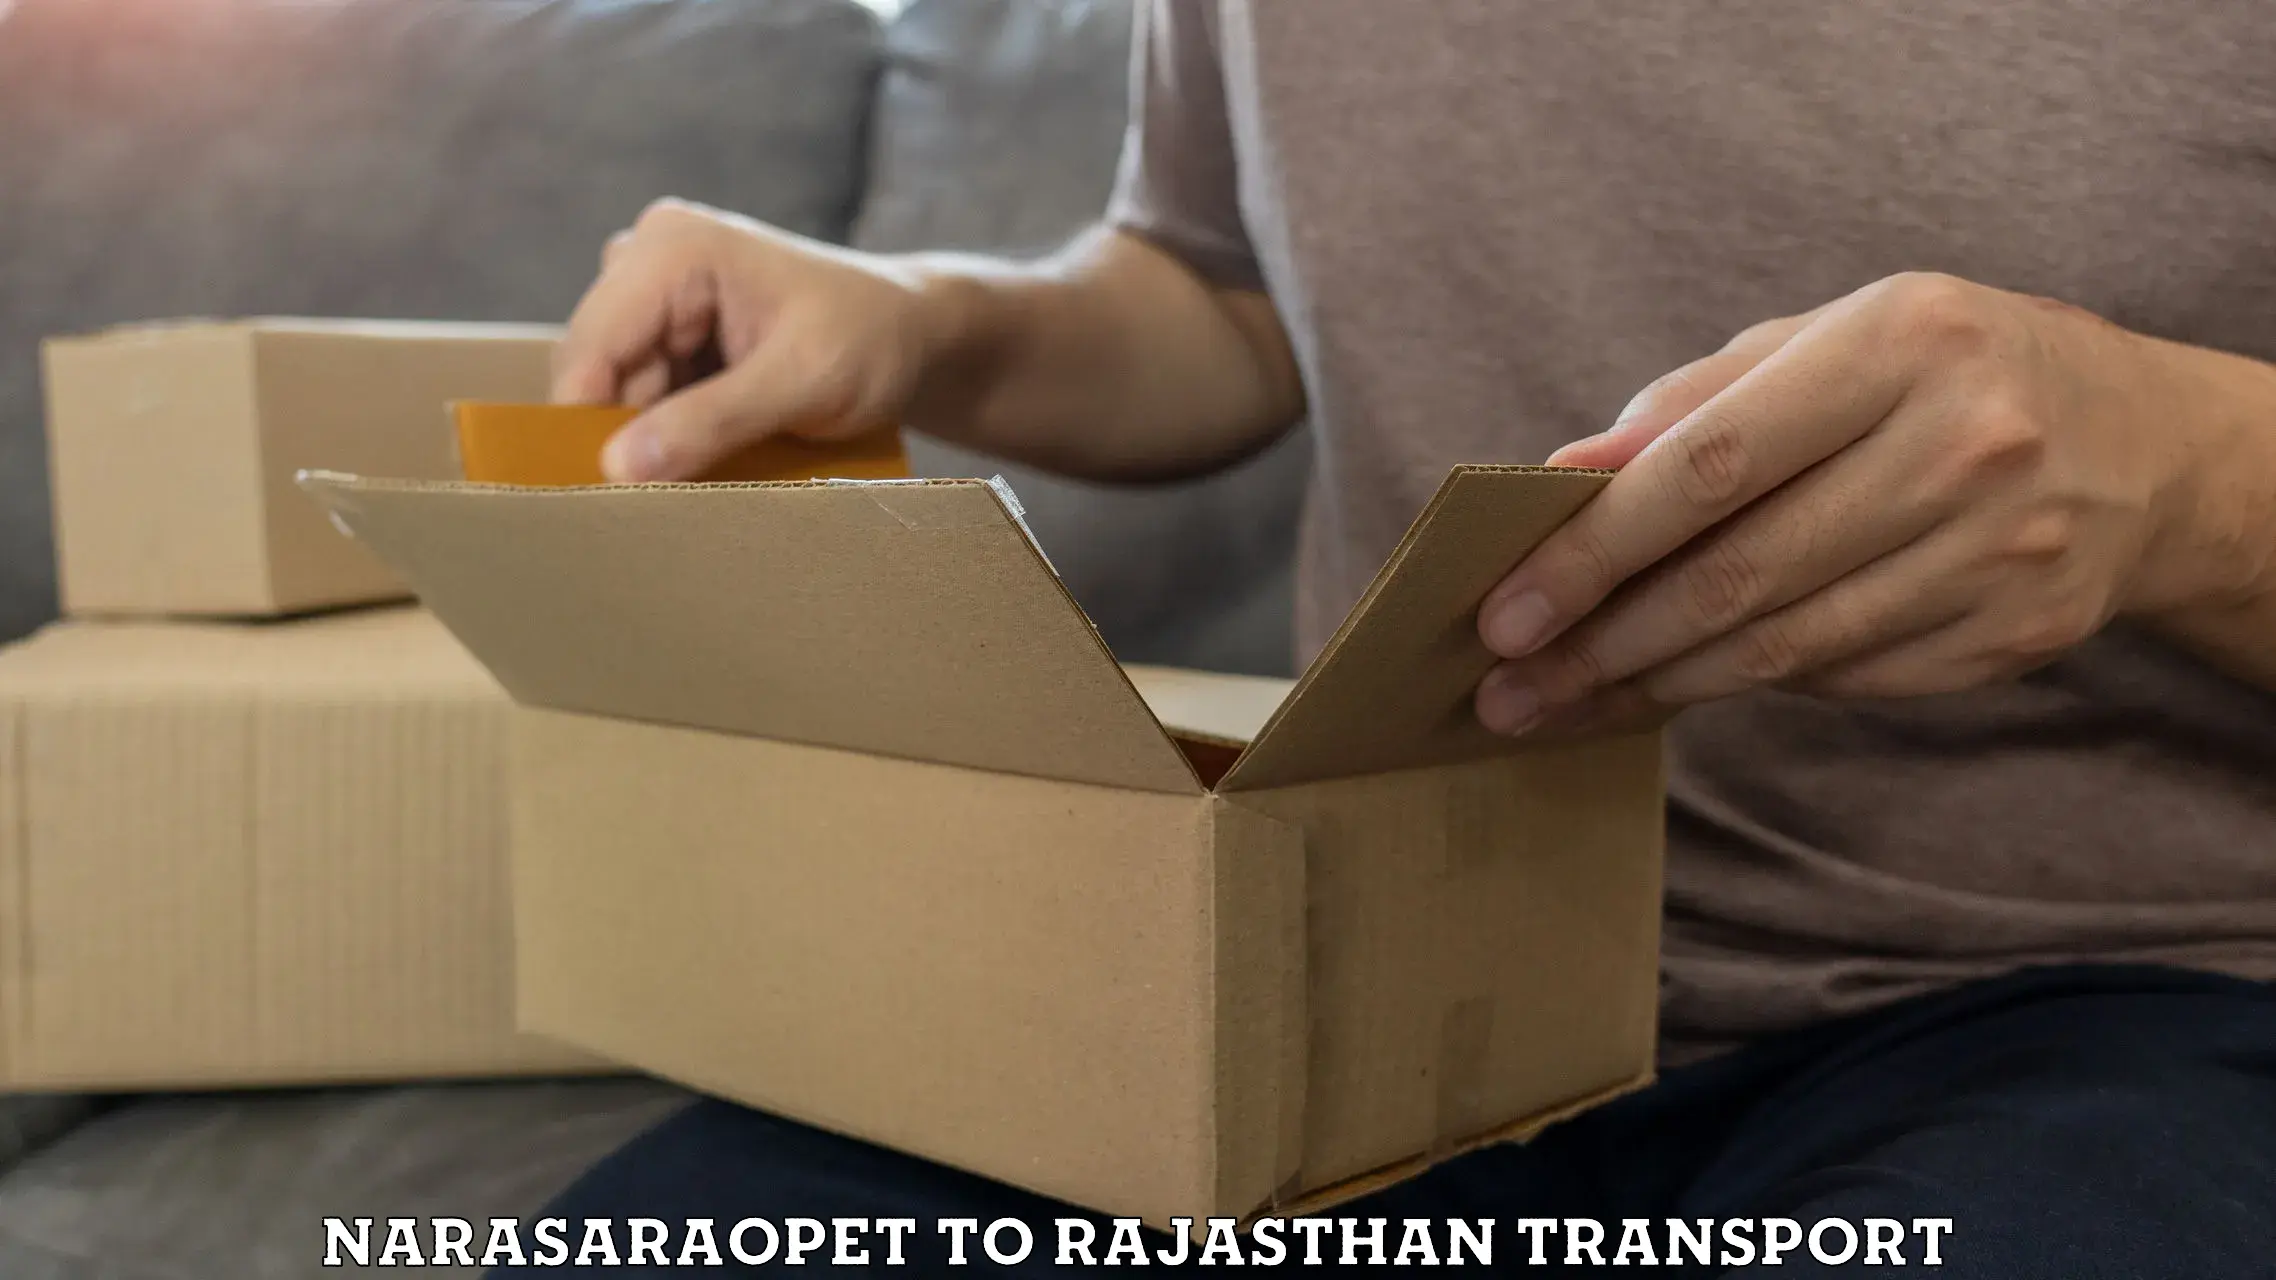 Truck transport companies in India Narasaraopet to Yeswanthapur